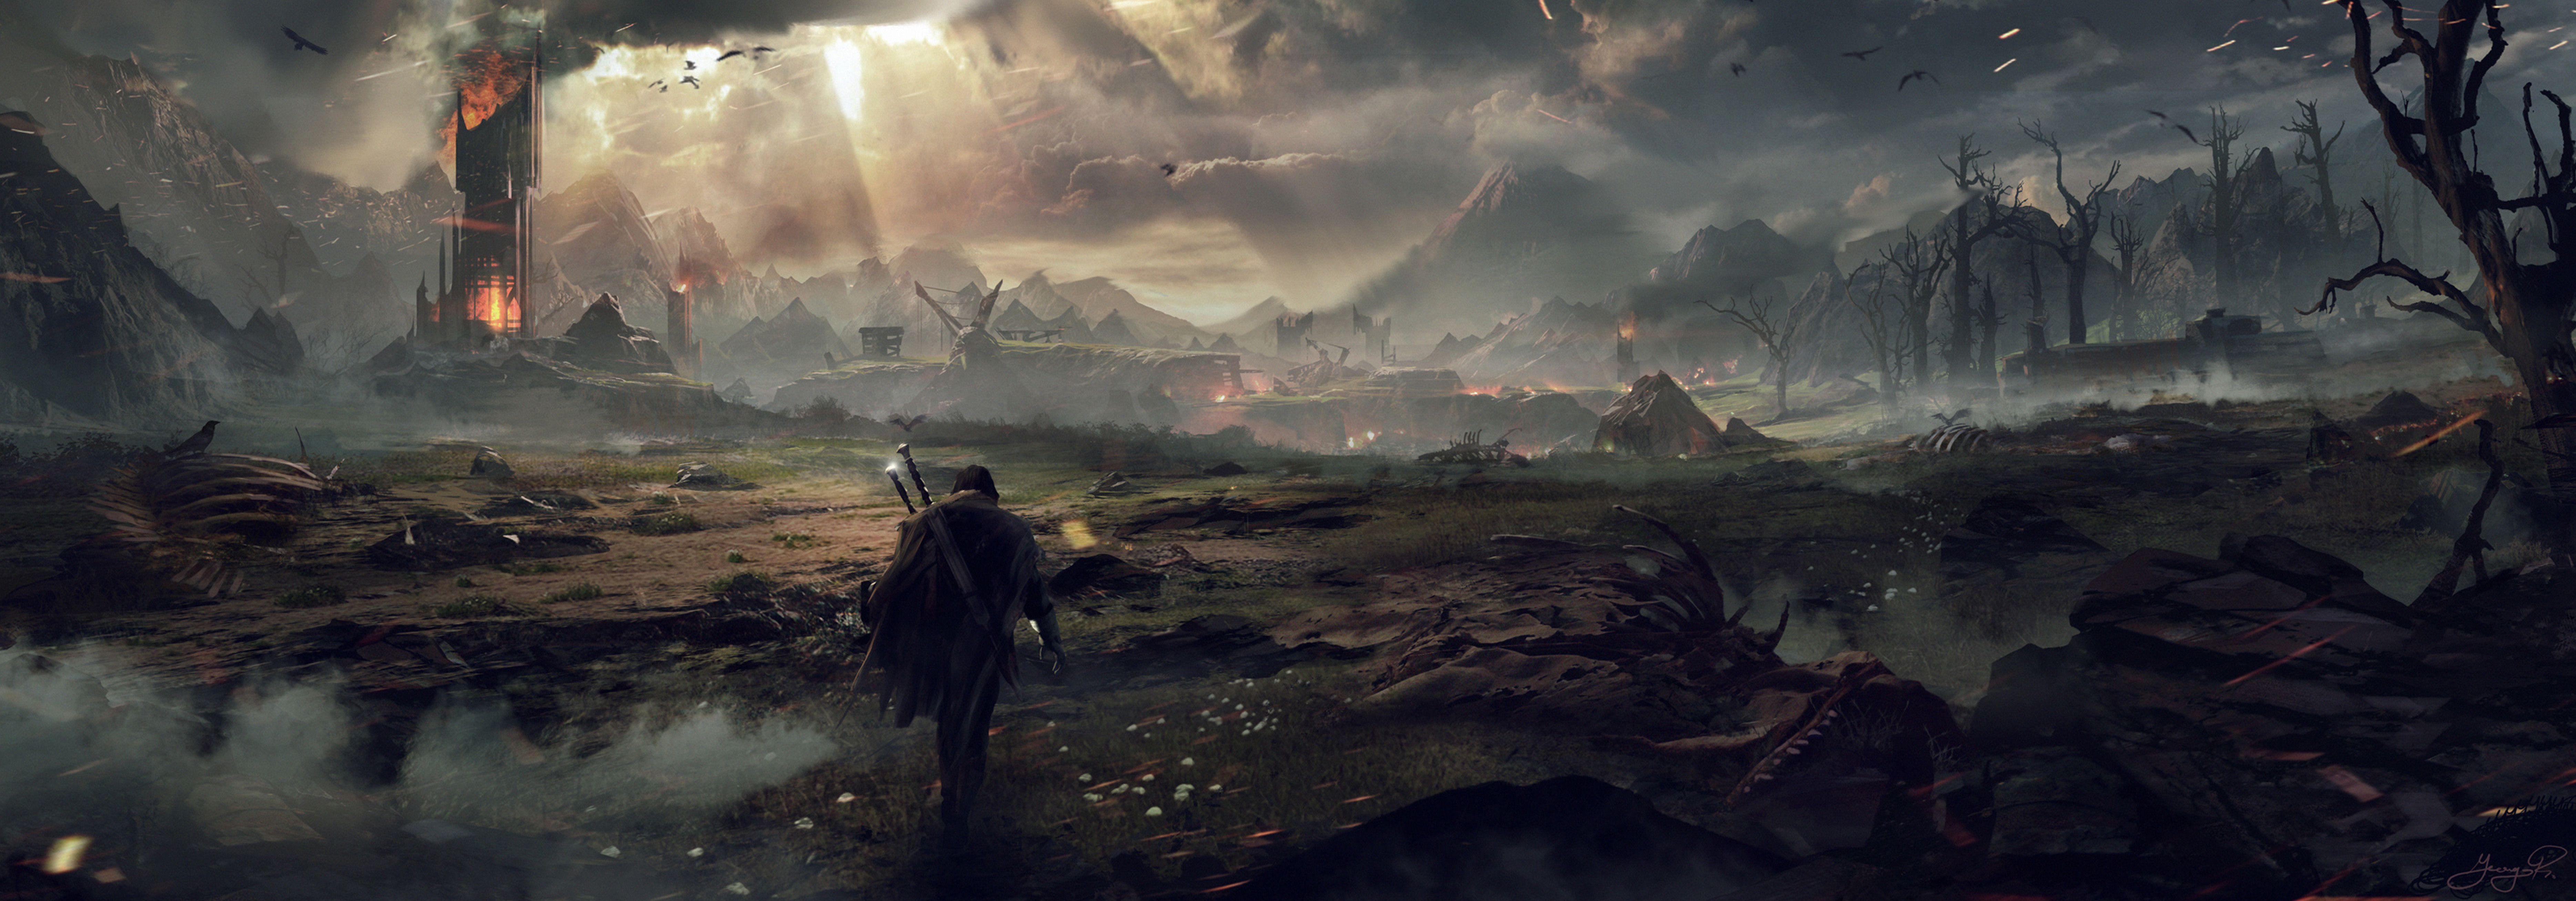 Middle Earth Shadow Of Mordor 7475x2615